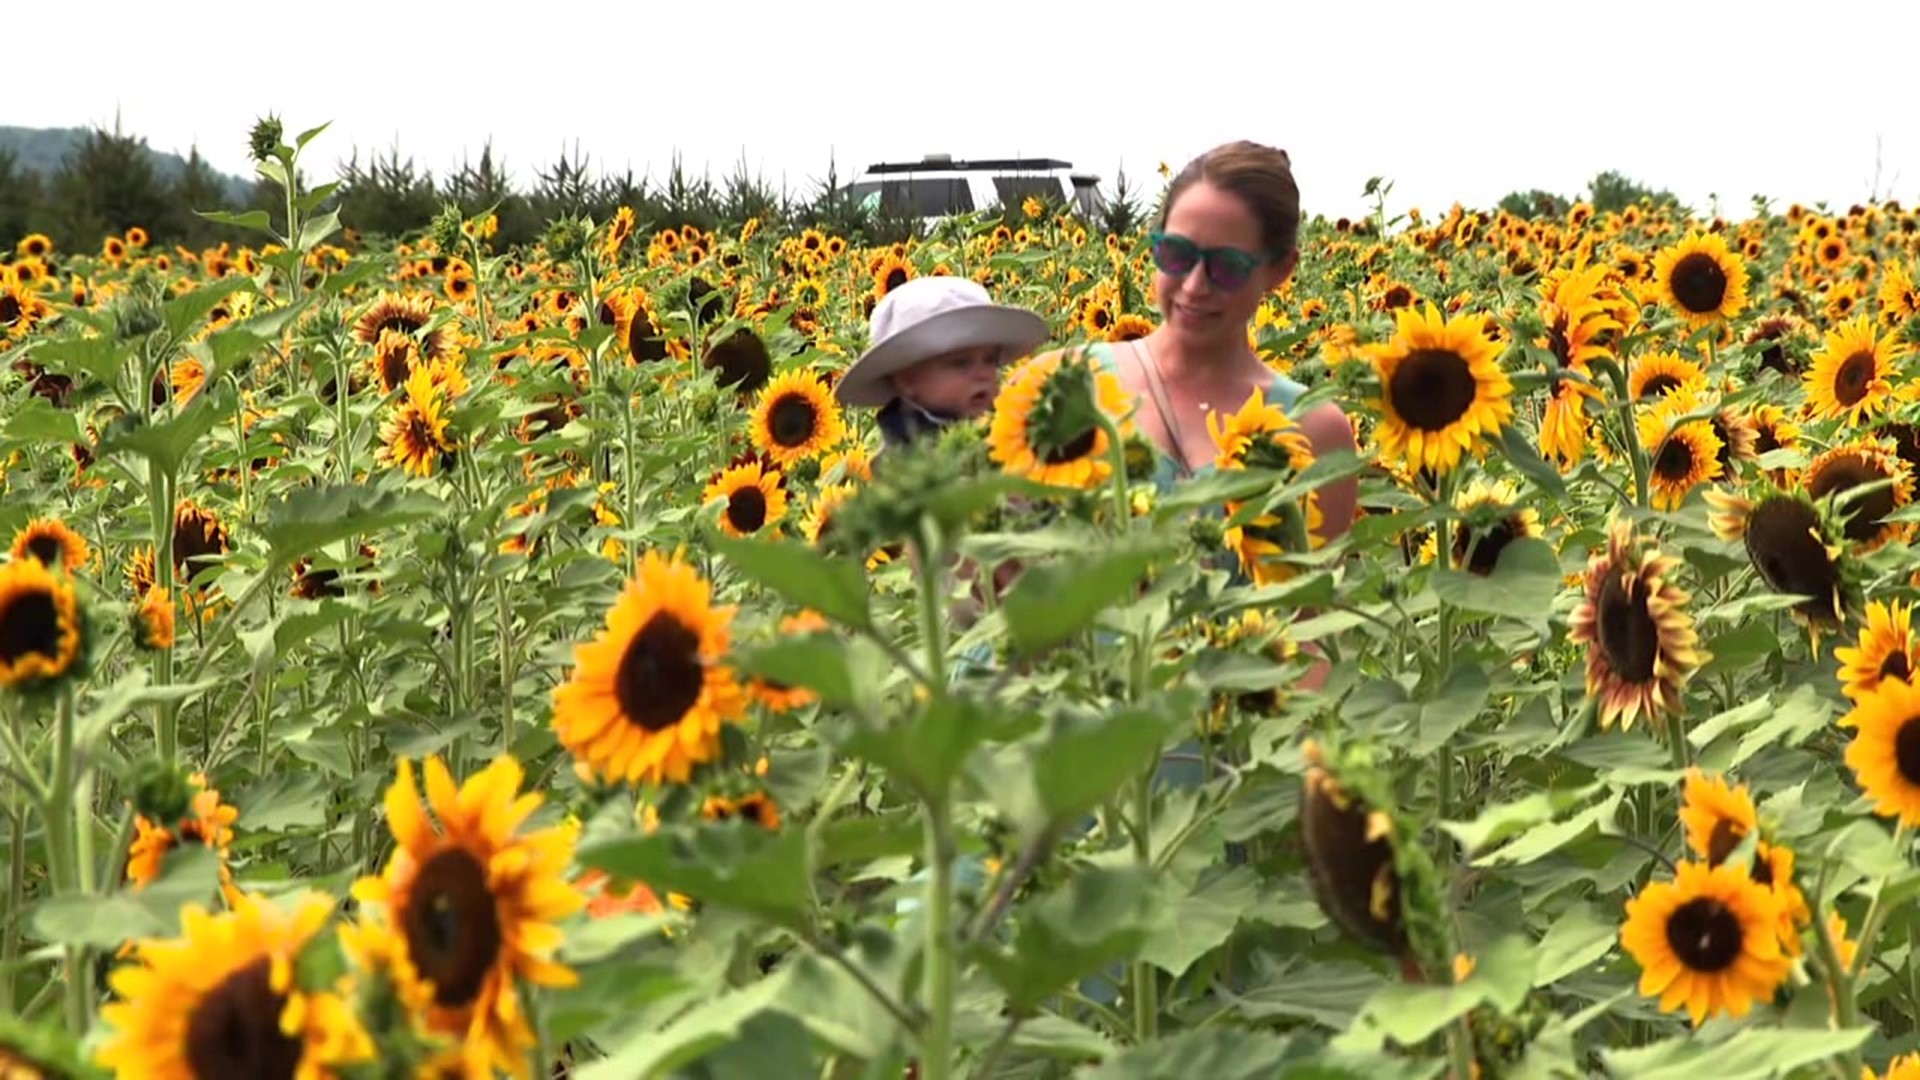 The Sunflower Festival at Yenser's Tree Farm runs this weekend and next from 11 a.m. to 6 p.m.